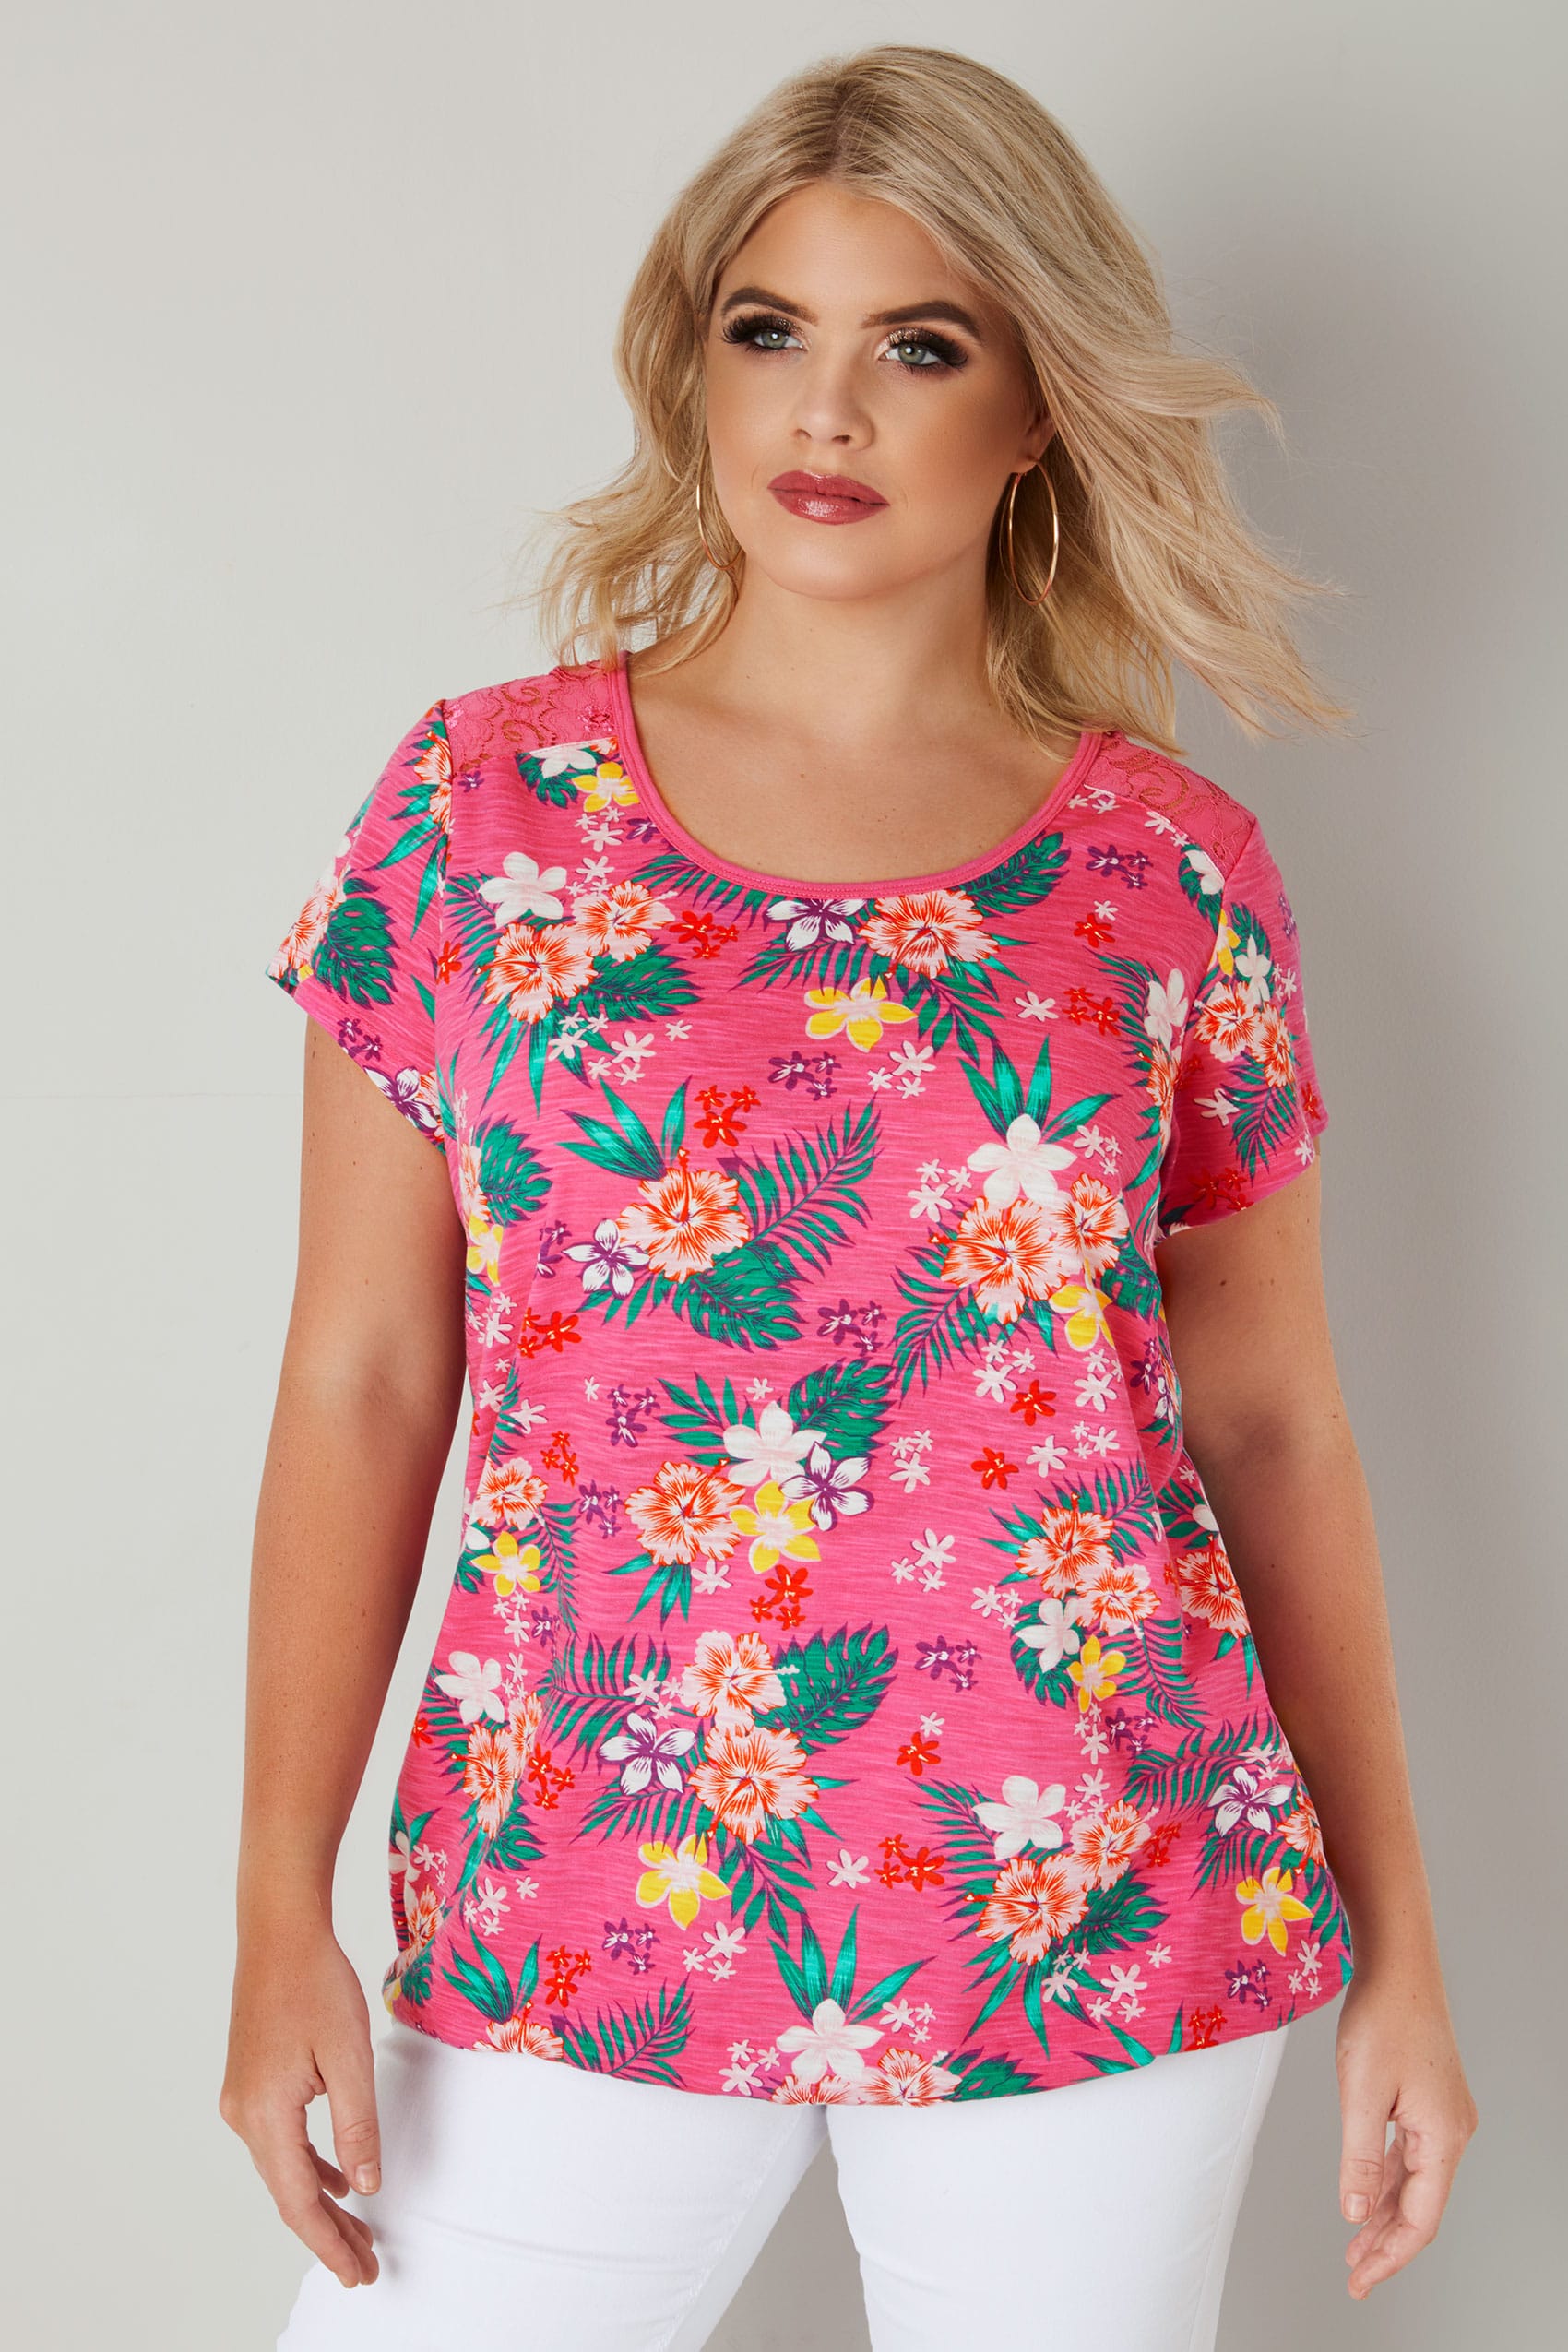 Pink Tropical Floral Lace Top, plus size 16 to 36